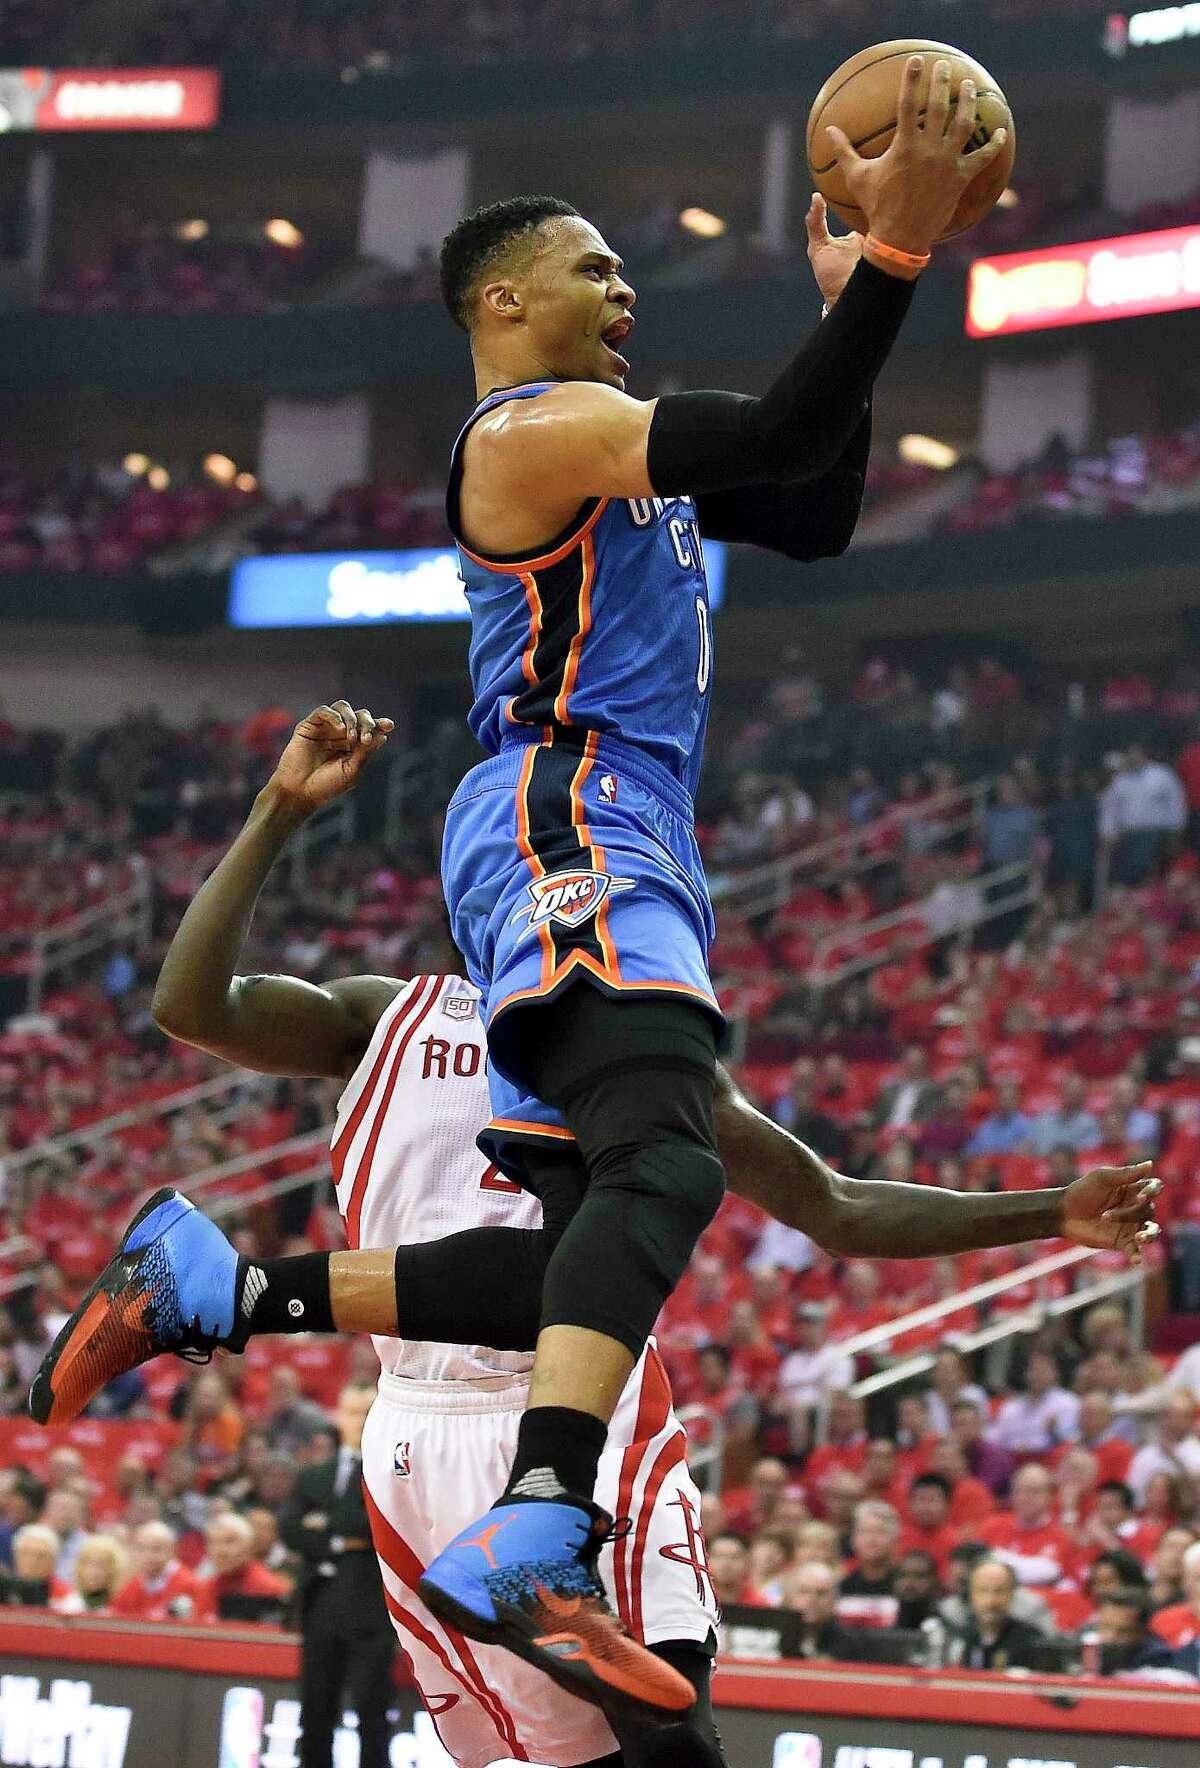 Oklahoma City Thunder guard Russell Westbrook drives past Houston Rockets guard Patrick Beverley during the first half in Game 2 of an NBA basketball first-round playoff series, Wednesday, April 19, 2017, in Houston. (AP Photo/Eric Christian Smith)